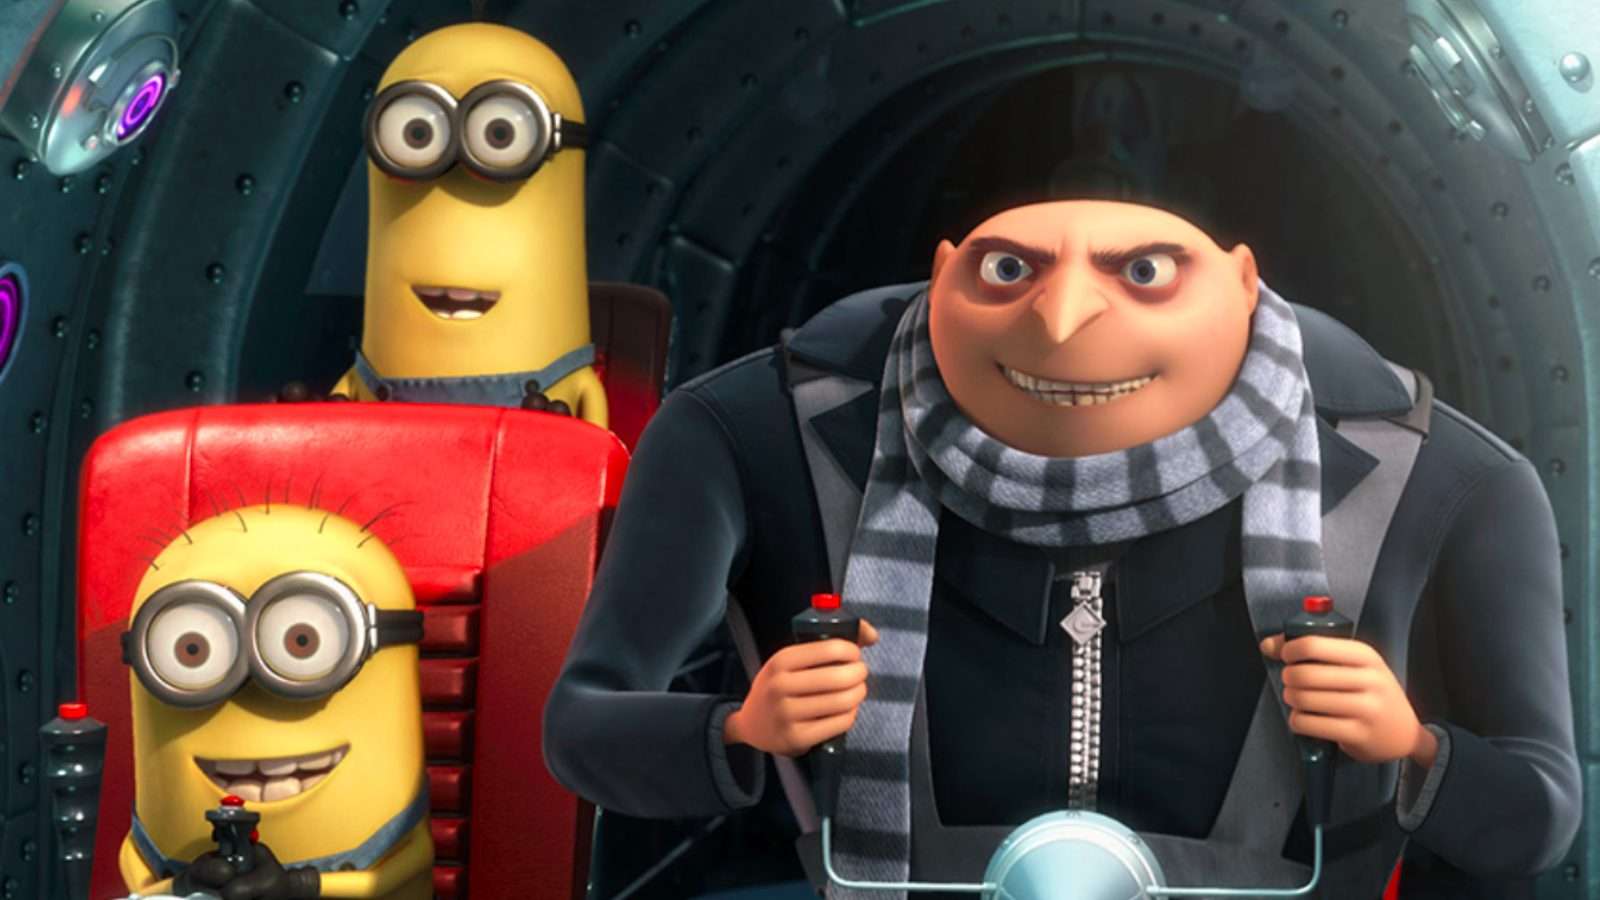 Despicable Me 4 trailer featuring Gru and minions.